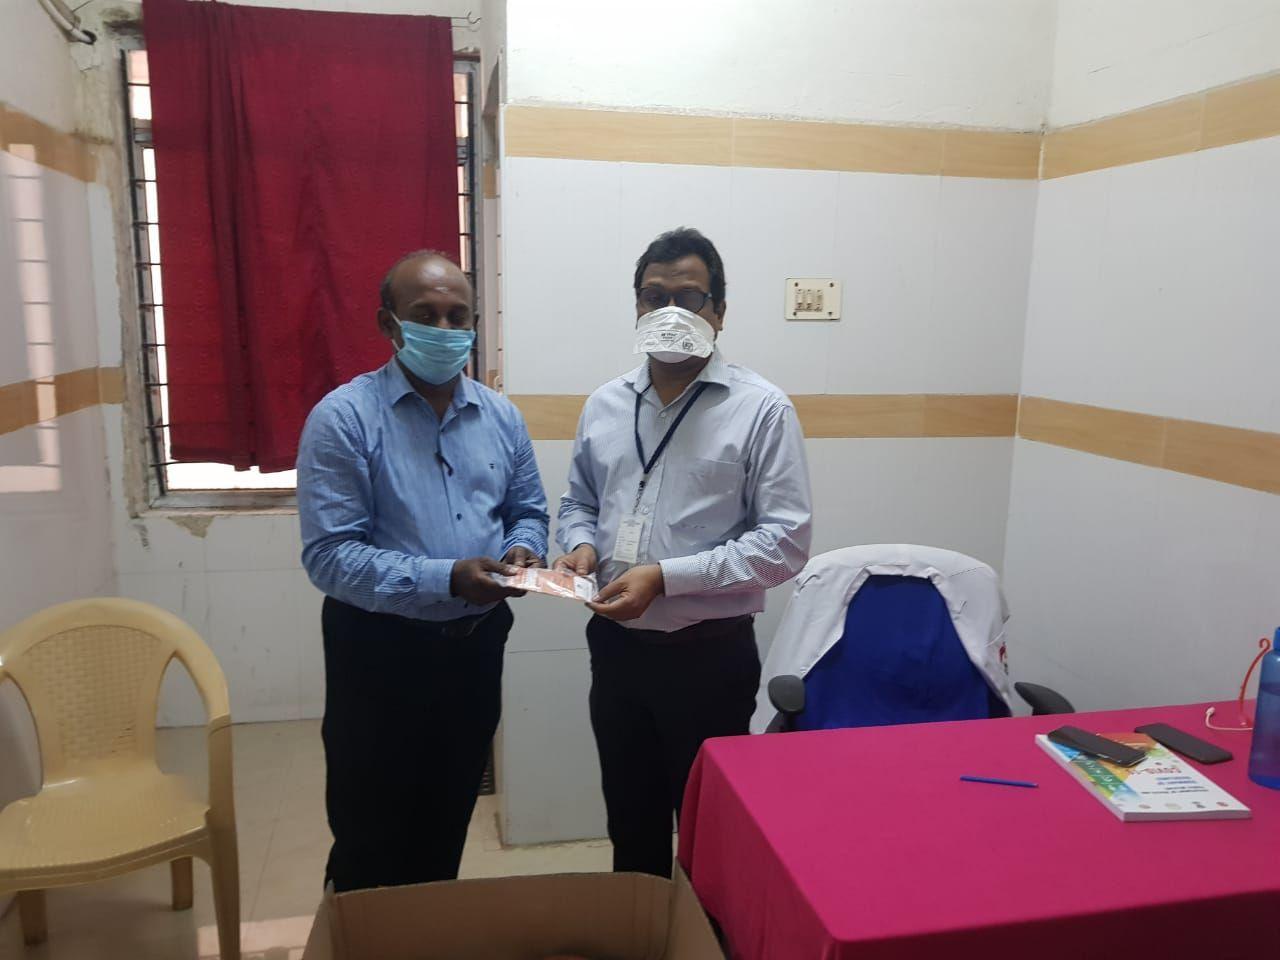 2020.05.07-IOA-_-TNOA-donated-1350-N-95-Masks-_-Face-Shields-to-HOD’s-of-Orthopedics-at-COVID-Hotspots-in-the-state-1